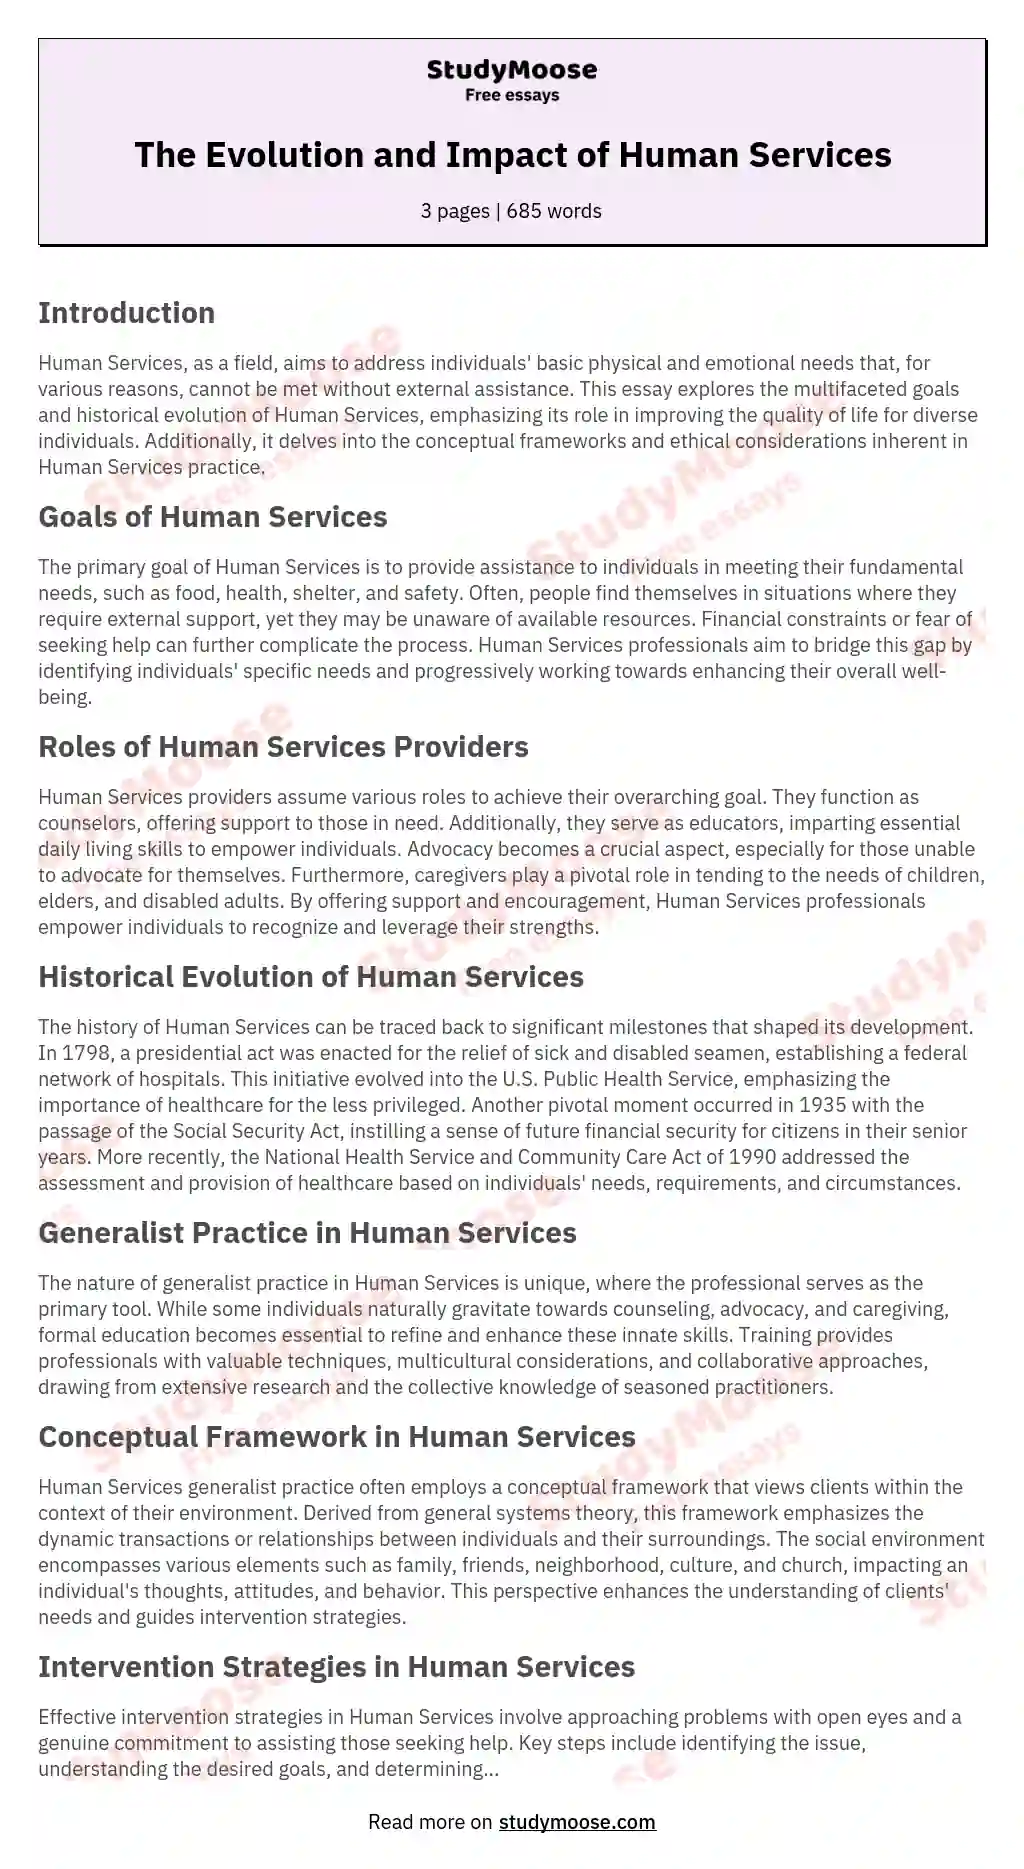 The Evolution and Impact of Human Services essay